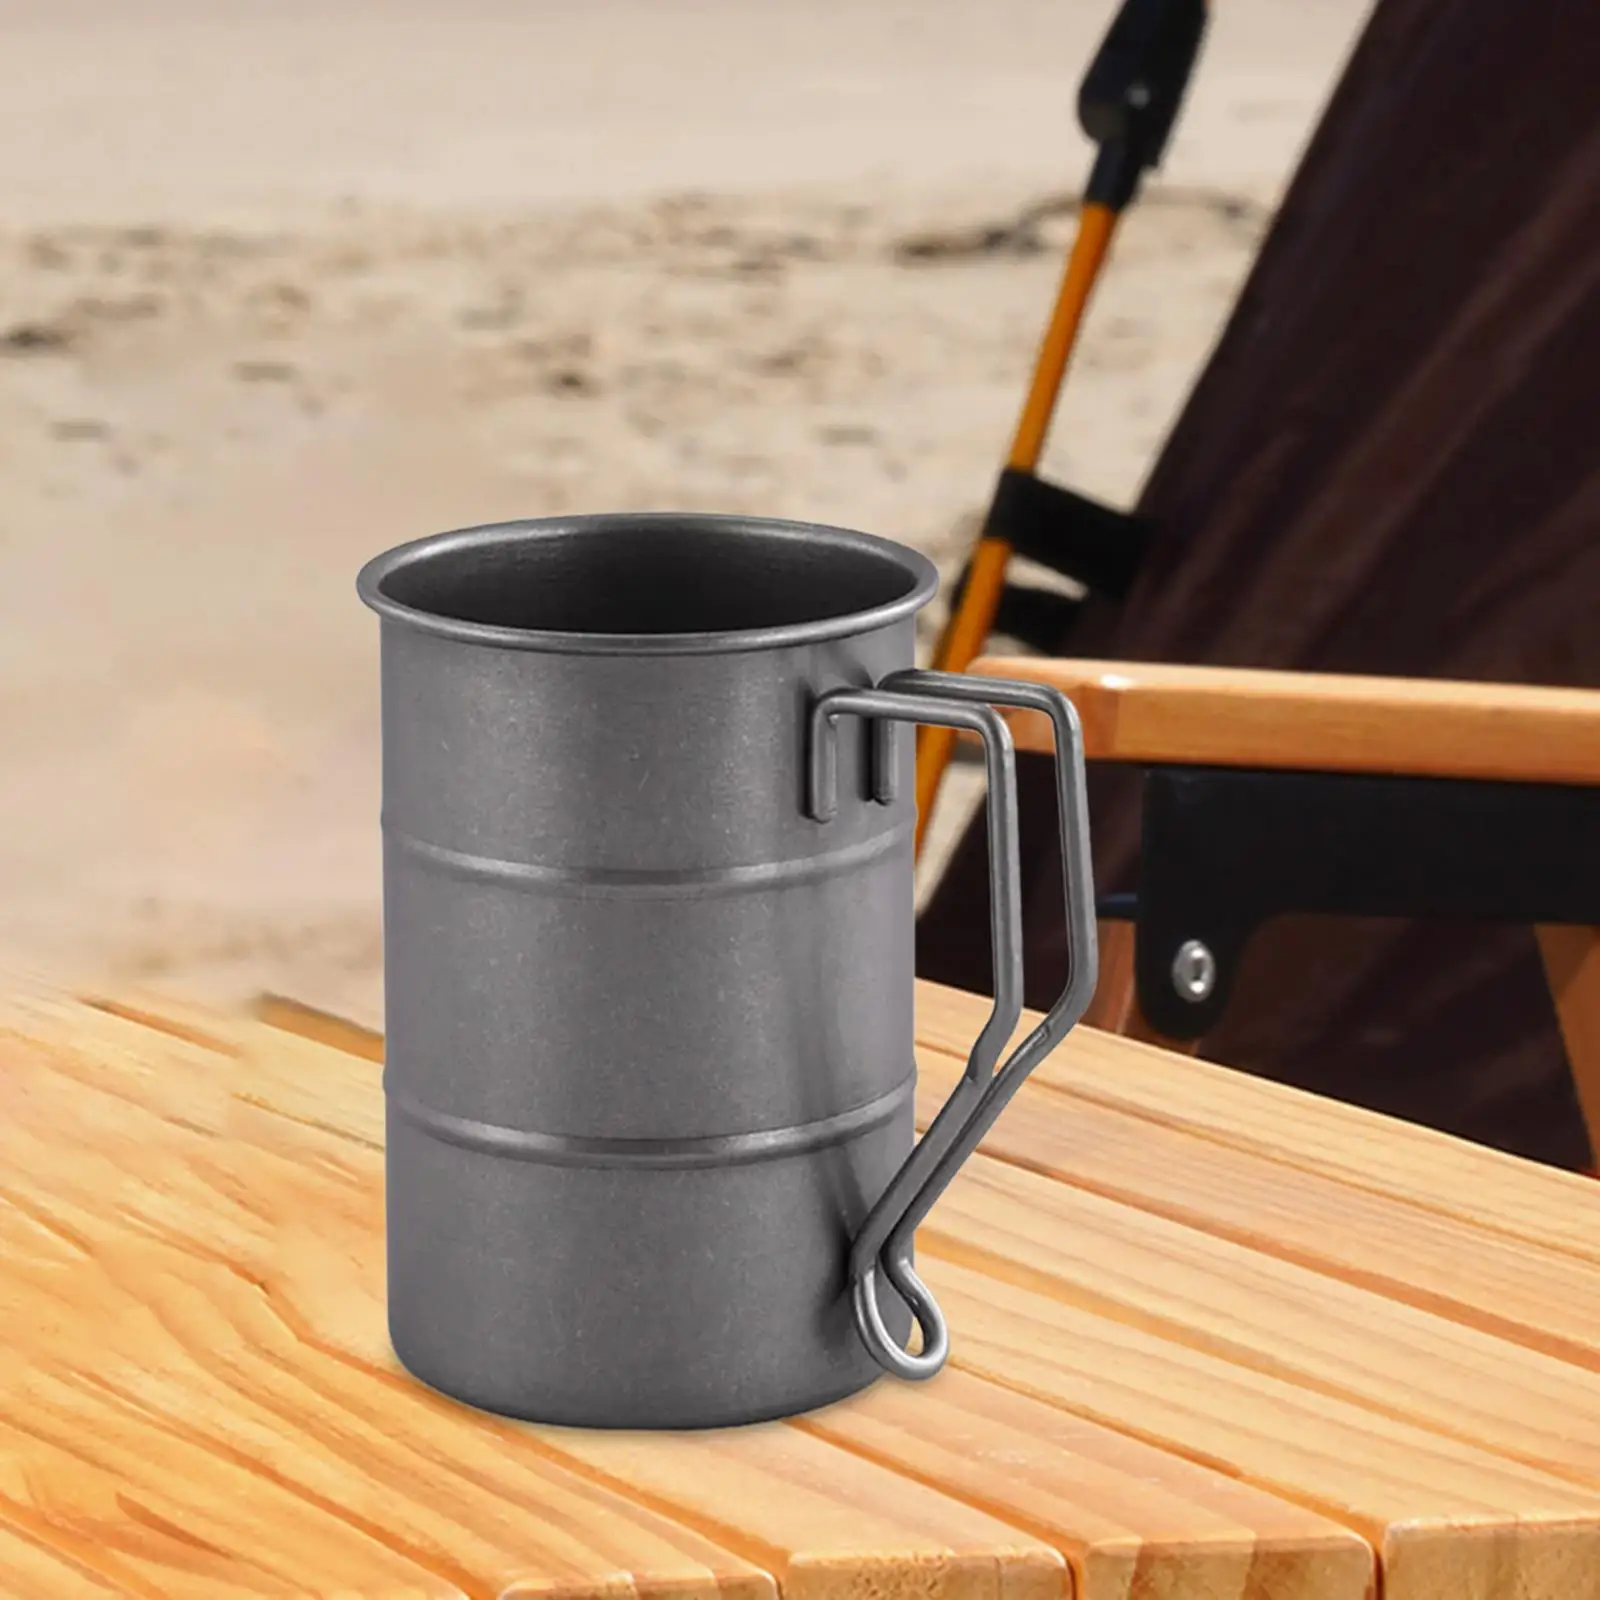 Camping Milk Mugs Water Cup Drinking Cup for Travel Home Office Fishing